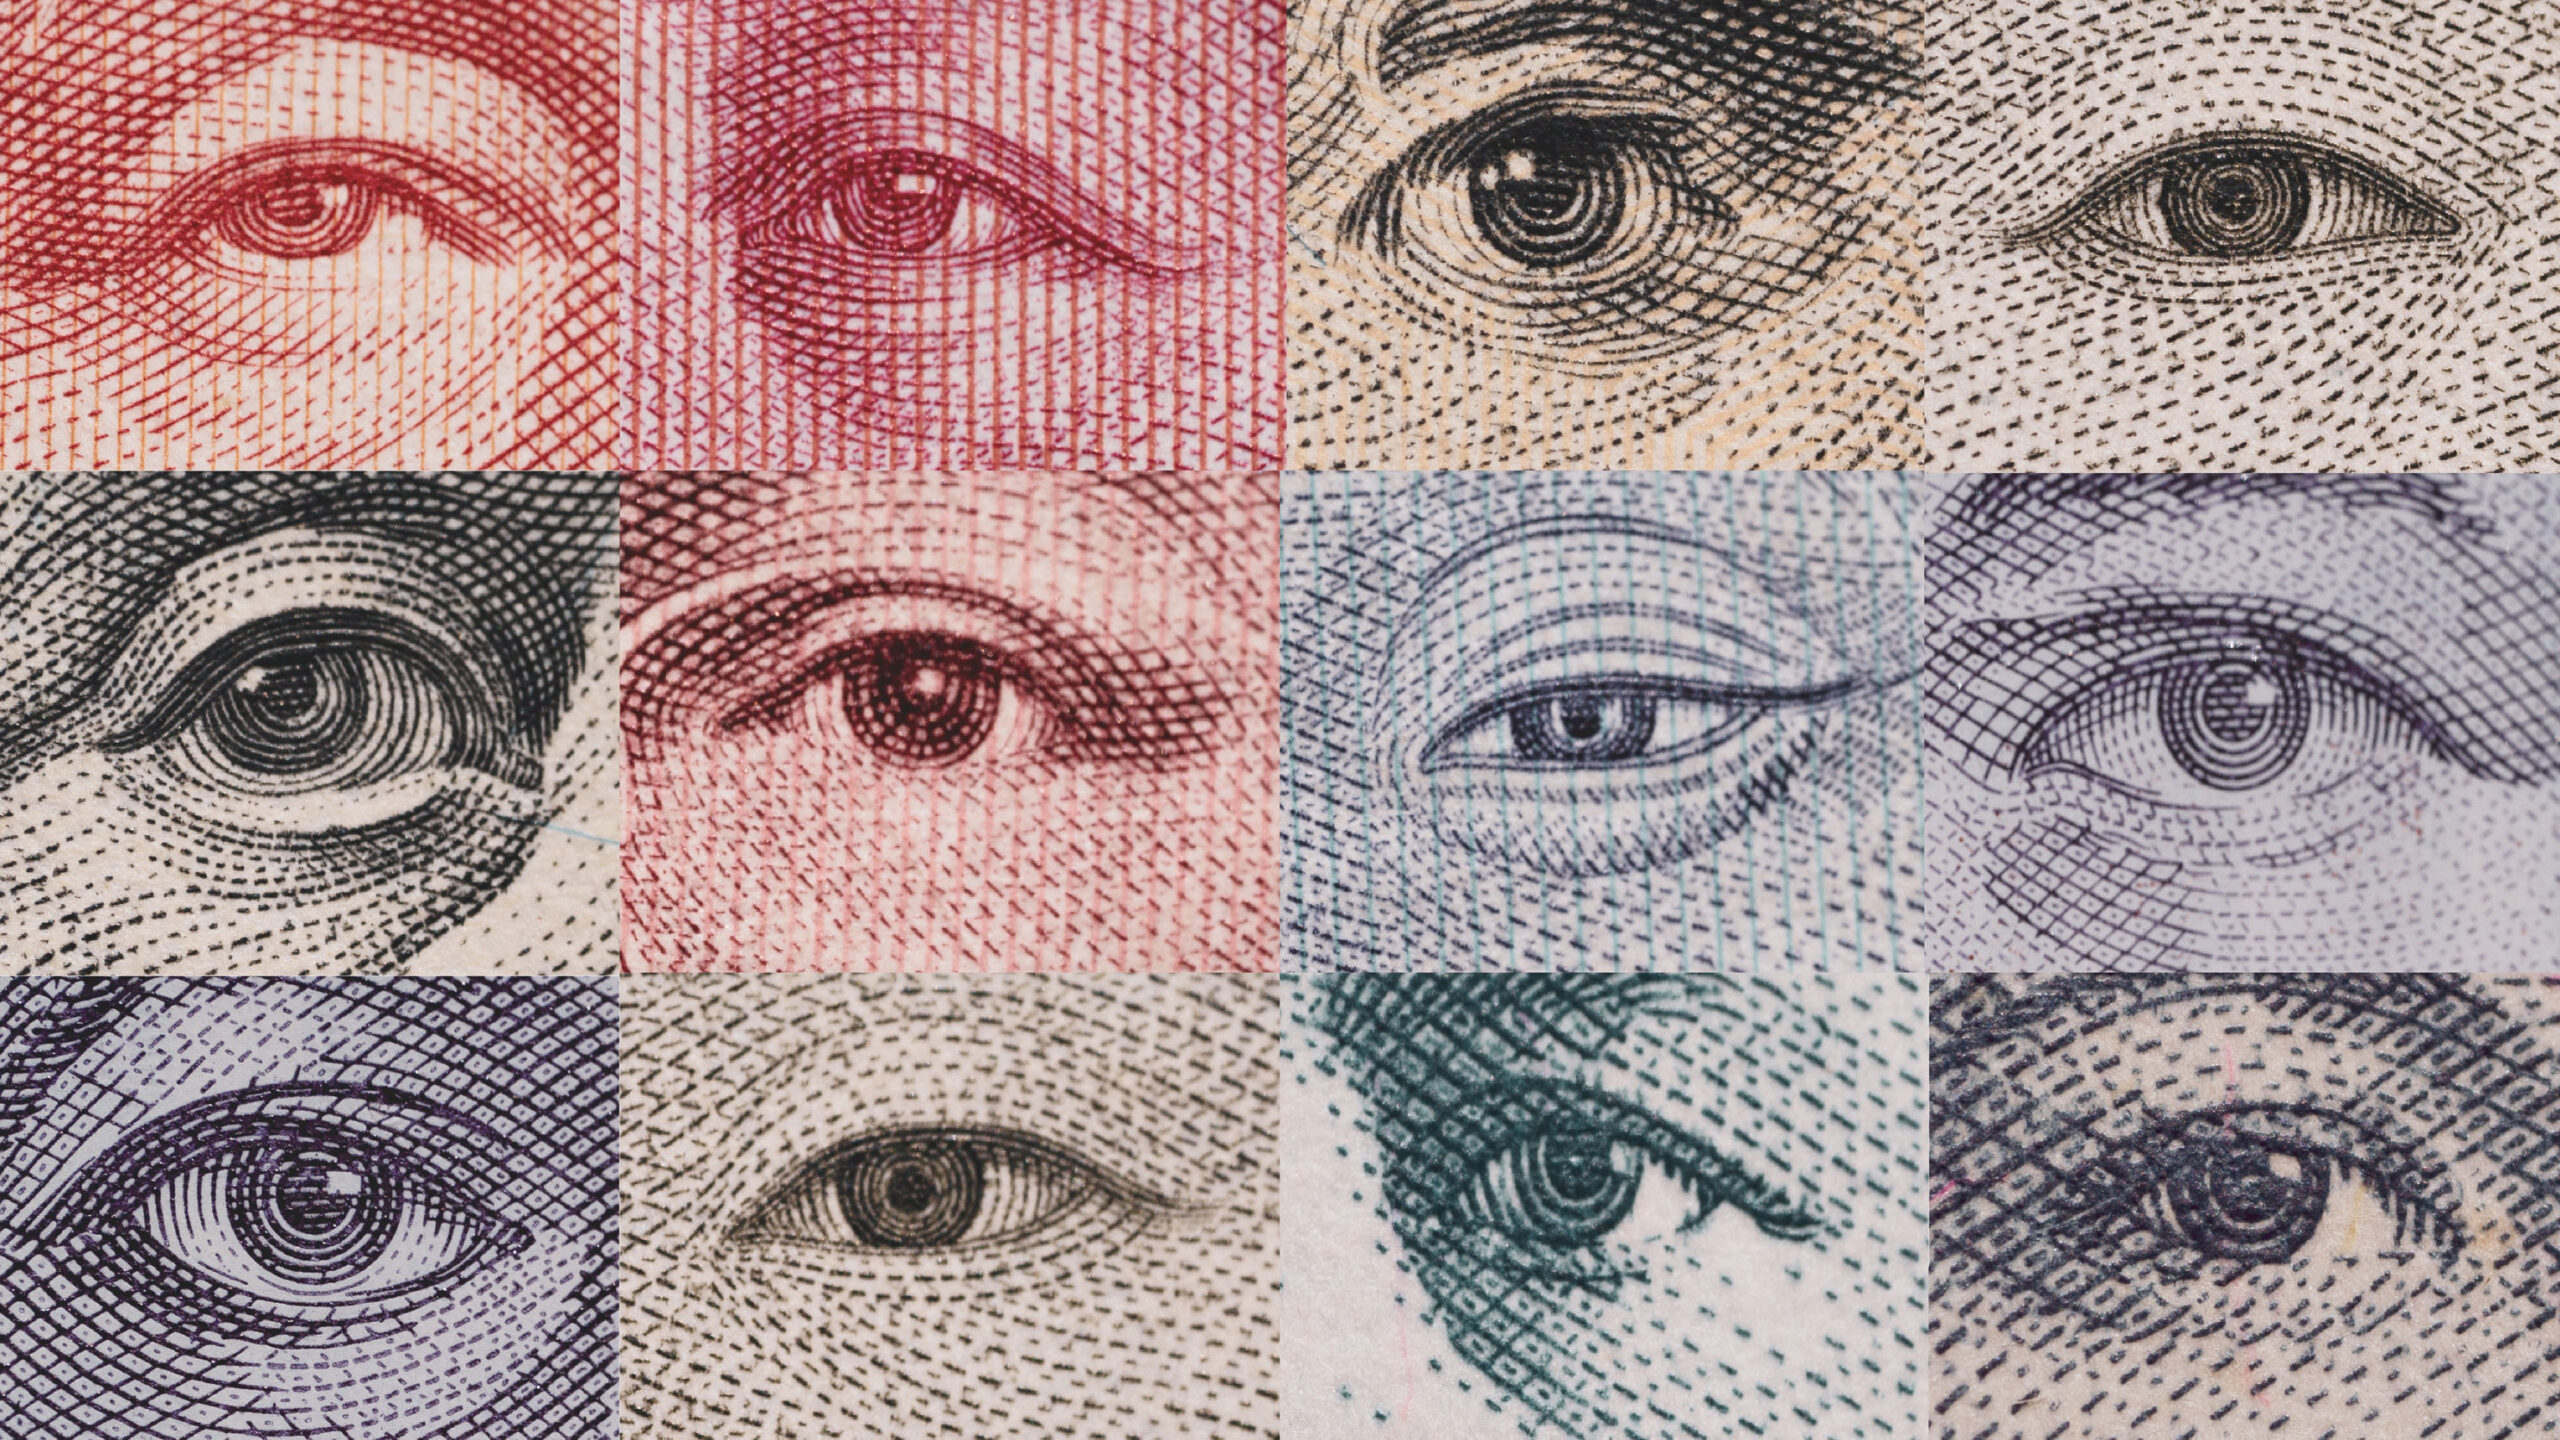 Close-up eyes of the people on the paper based money